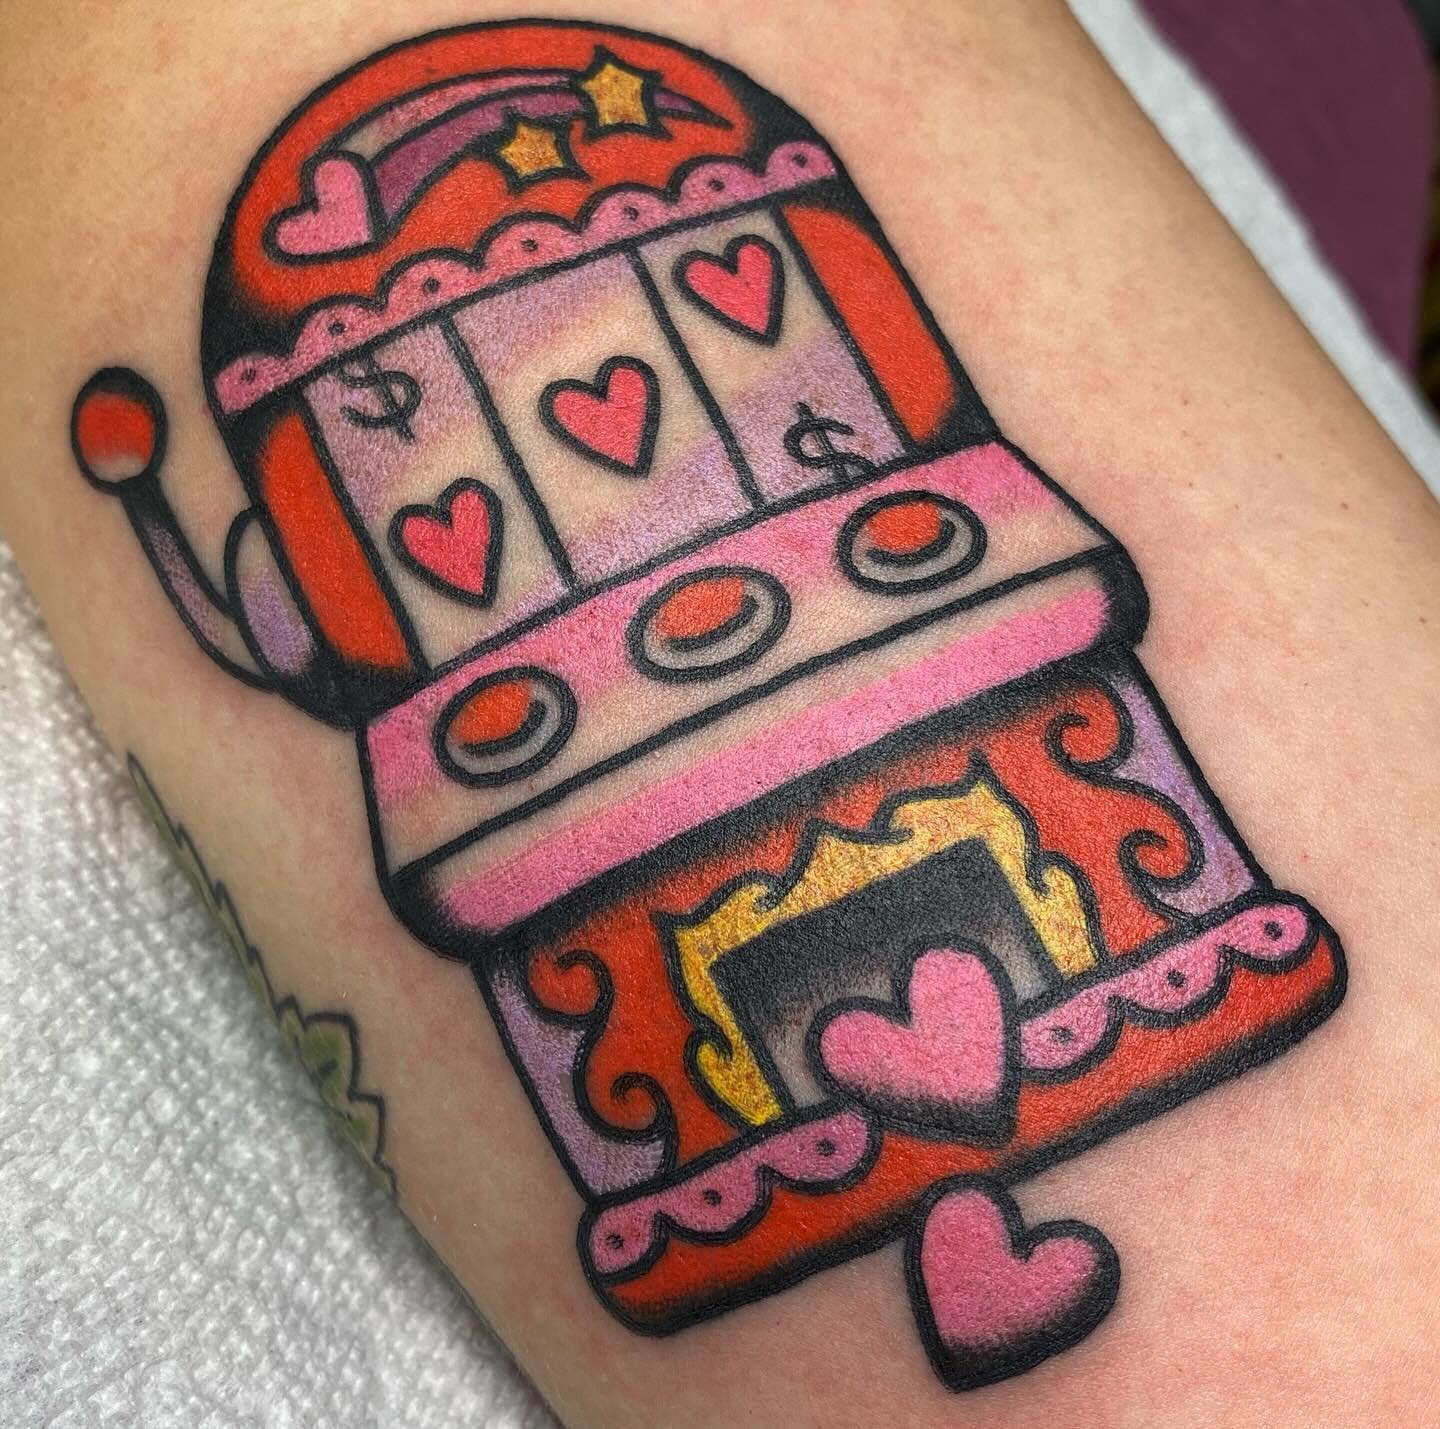 valentines slots. 💰💘🎰
❤️ books open / walk ins thurs-mon
📍@downtowntattoolasvegas
🔗 check &lsquo;booking&rsquo; highlight to book in
‼️check spam for reply

UPCOMING GUEST SPOTS + EVENTS :

✨PHOENIX, AZ
May 18-19th
@spottedpanthertattoo
*fully b